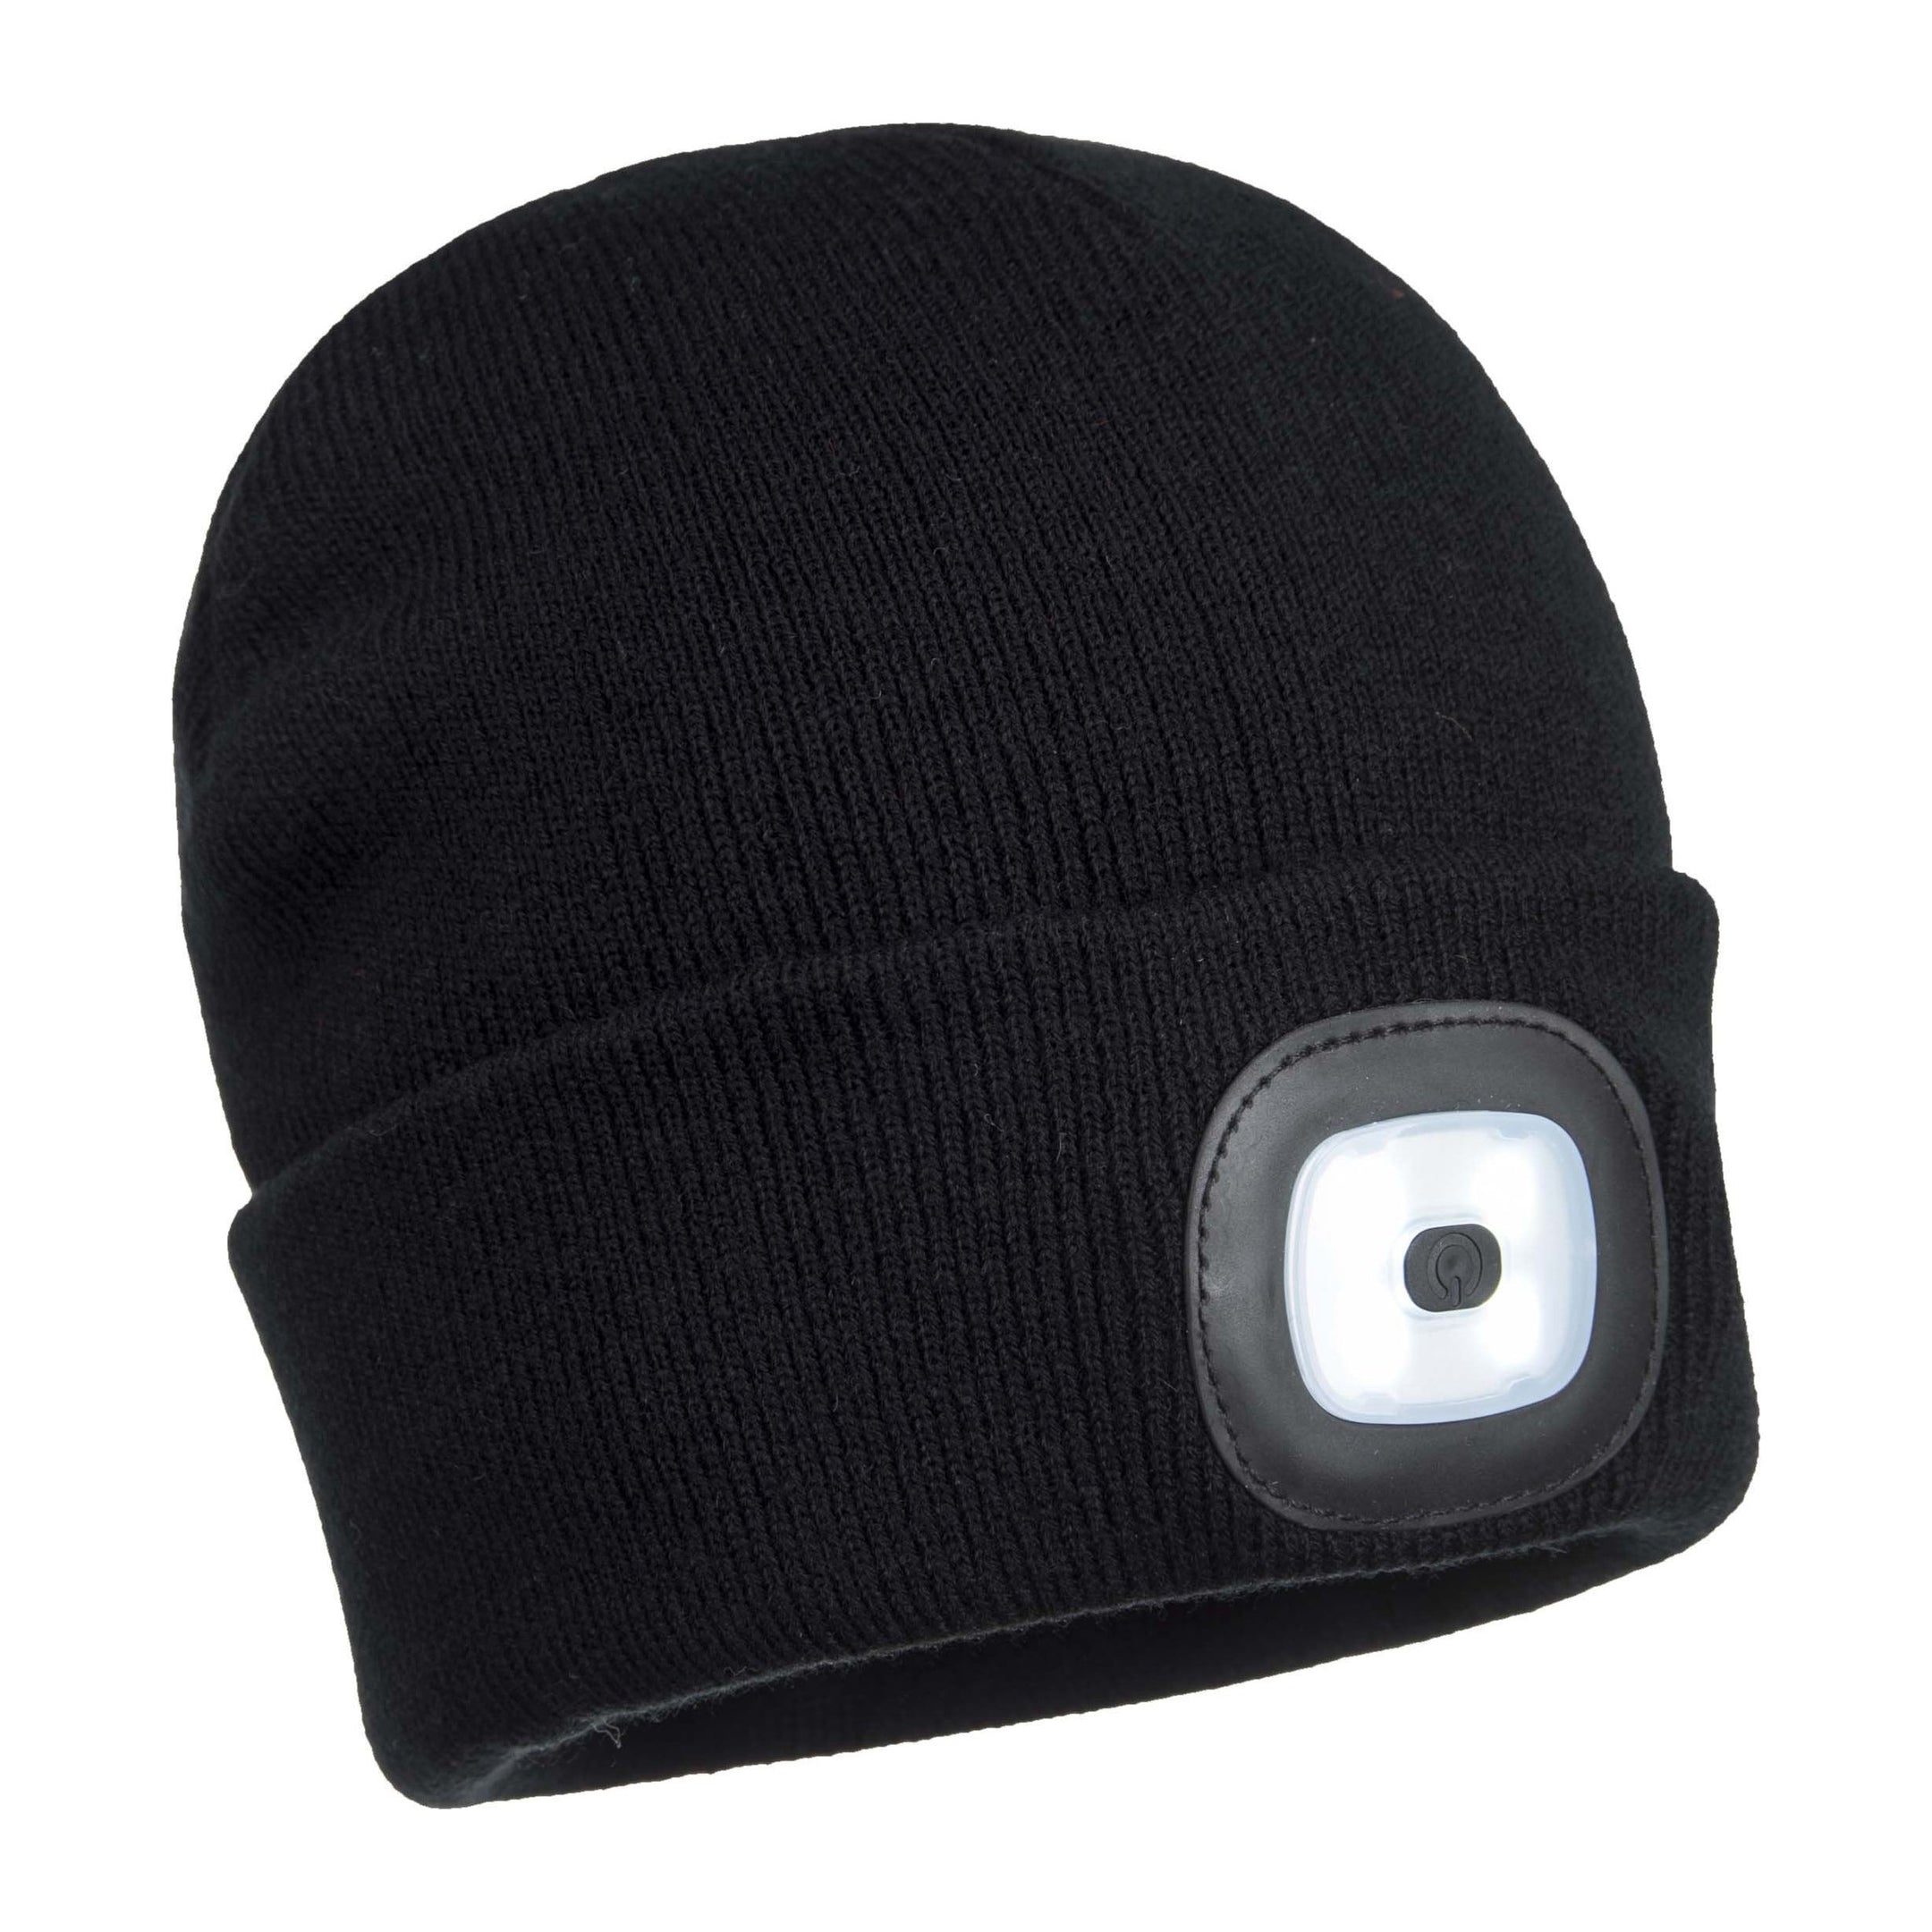 B029 Beanie LED Head Light USB Rechargeable Black Portwest at Ted Johnsons